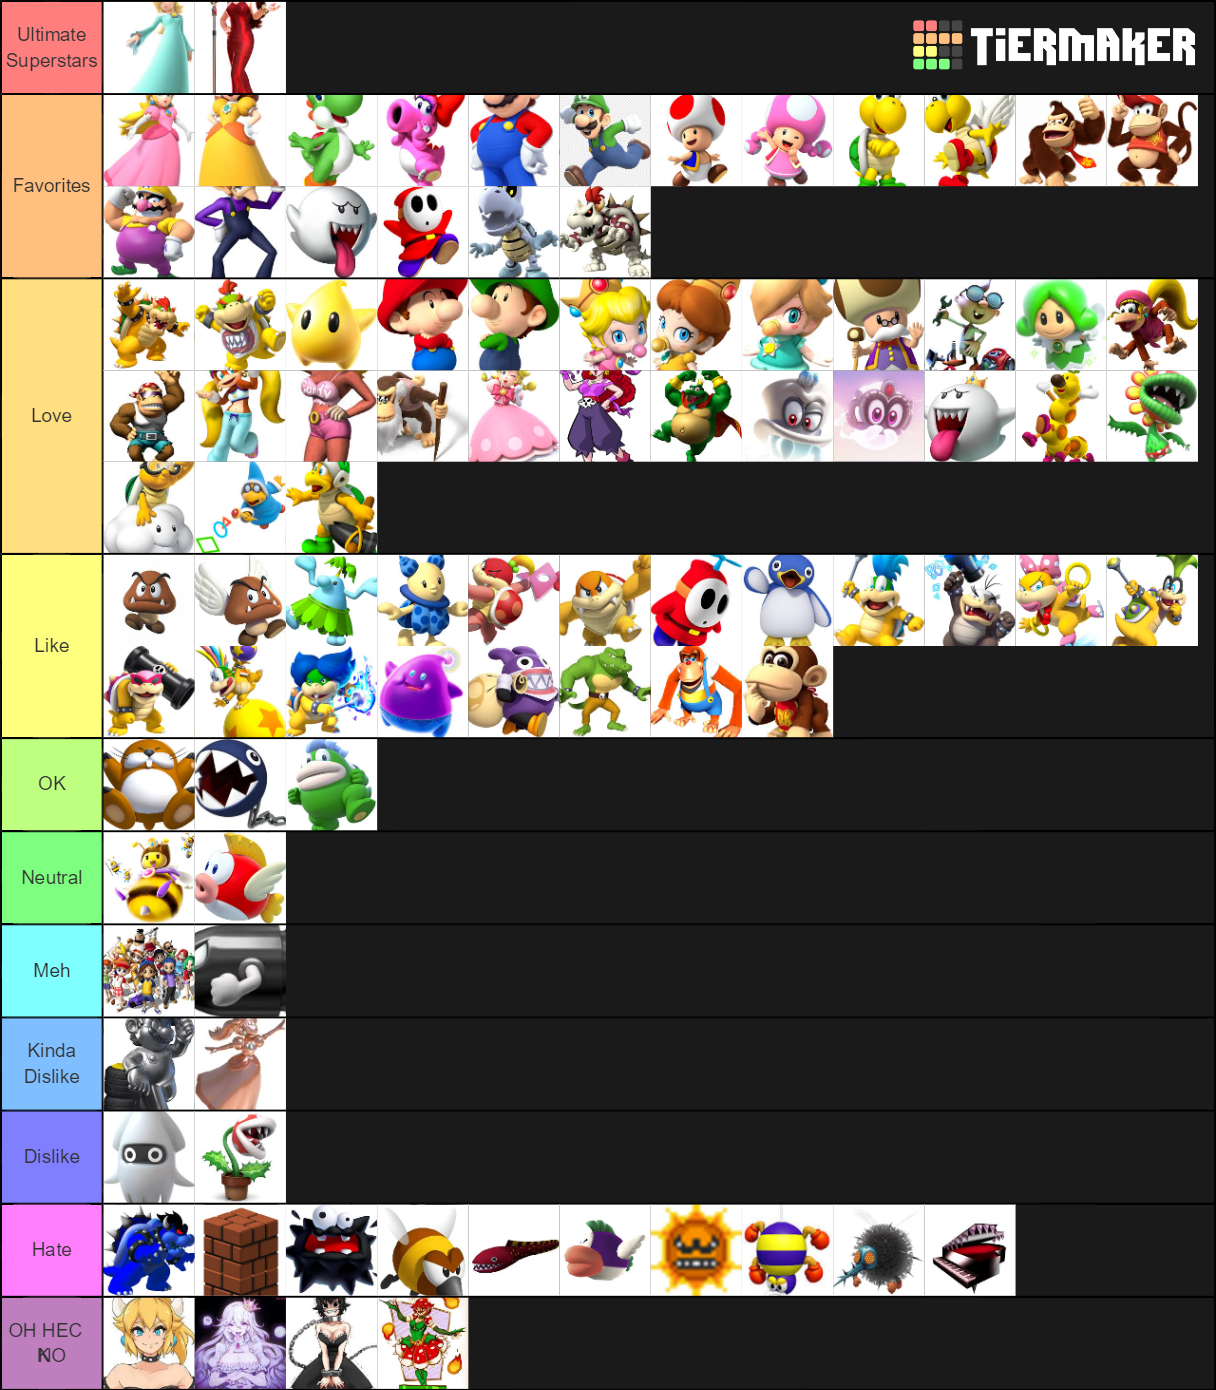 The Ultimate Mario Character Tier List (Community Rankings) - TierMaker